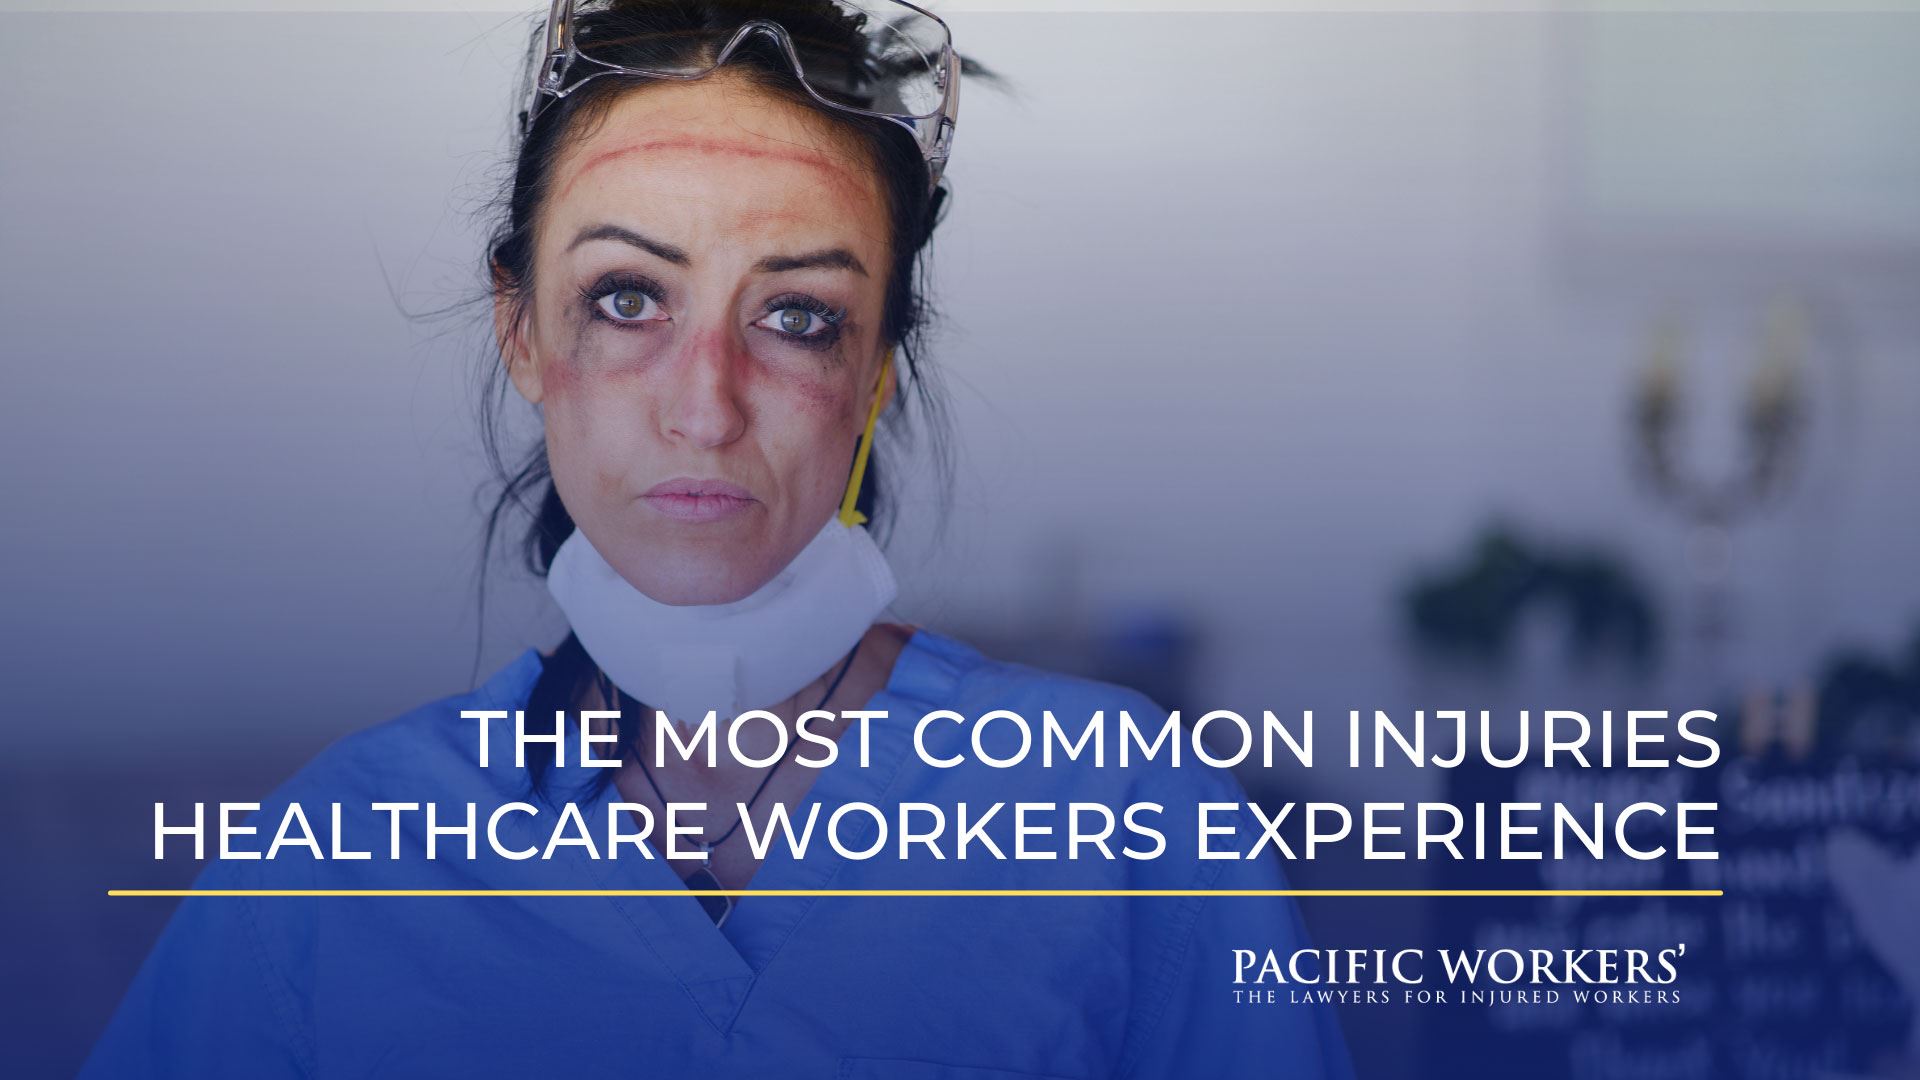 The Most Common Injuries Healthcare Workers Experience